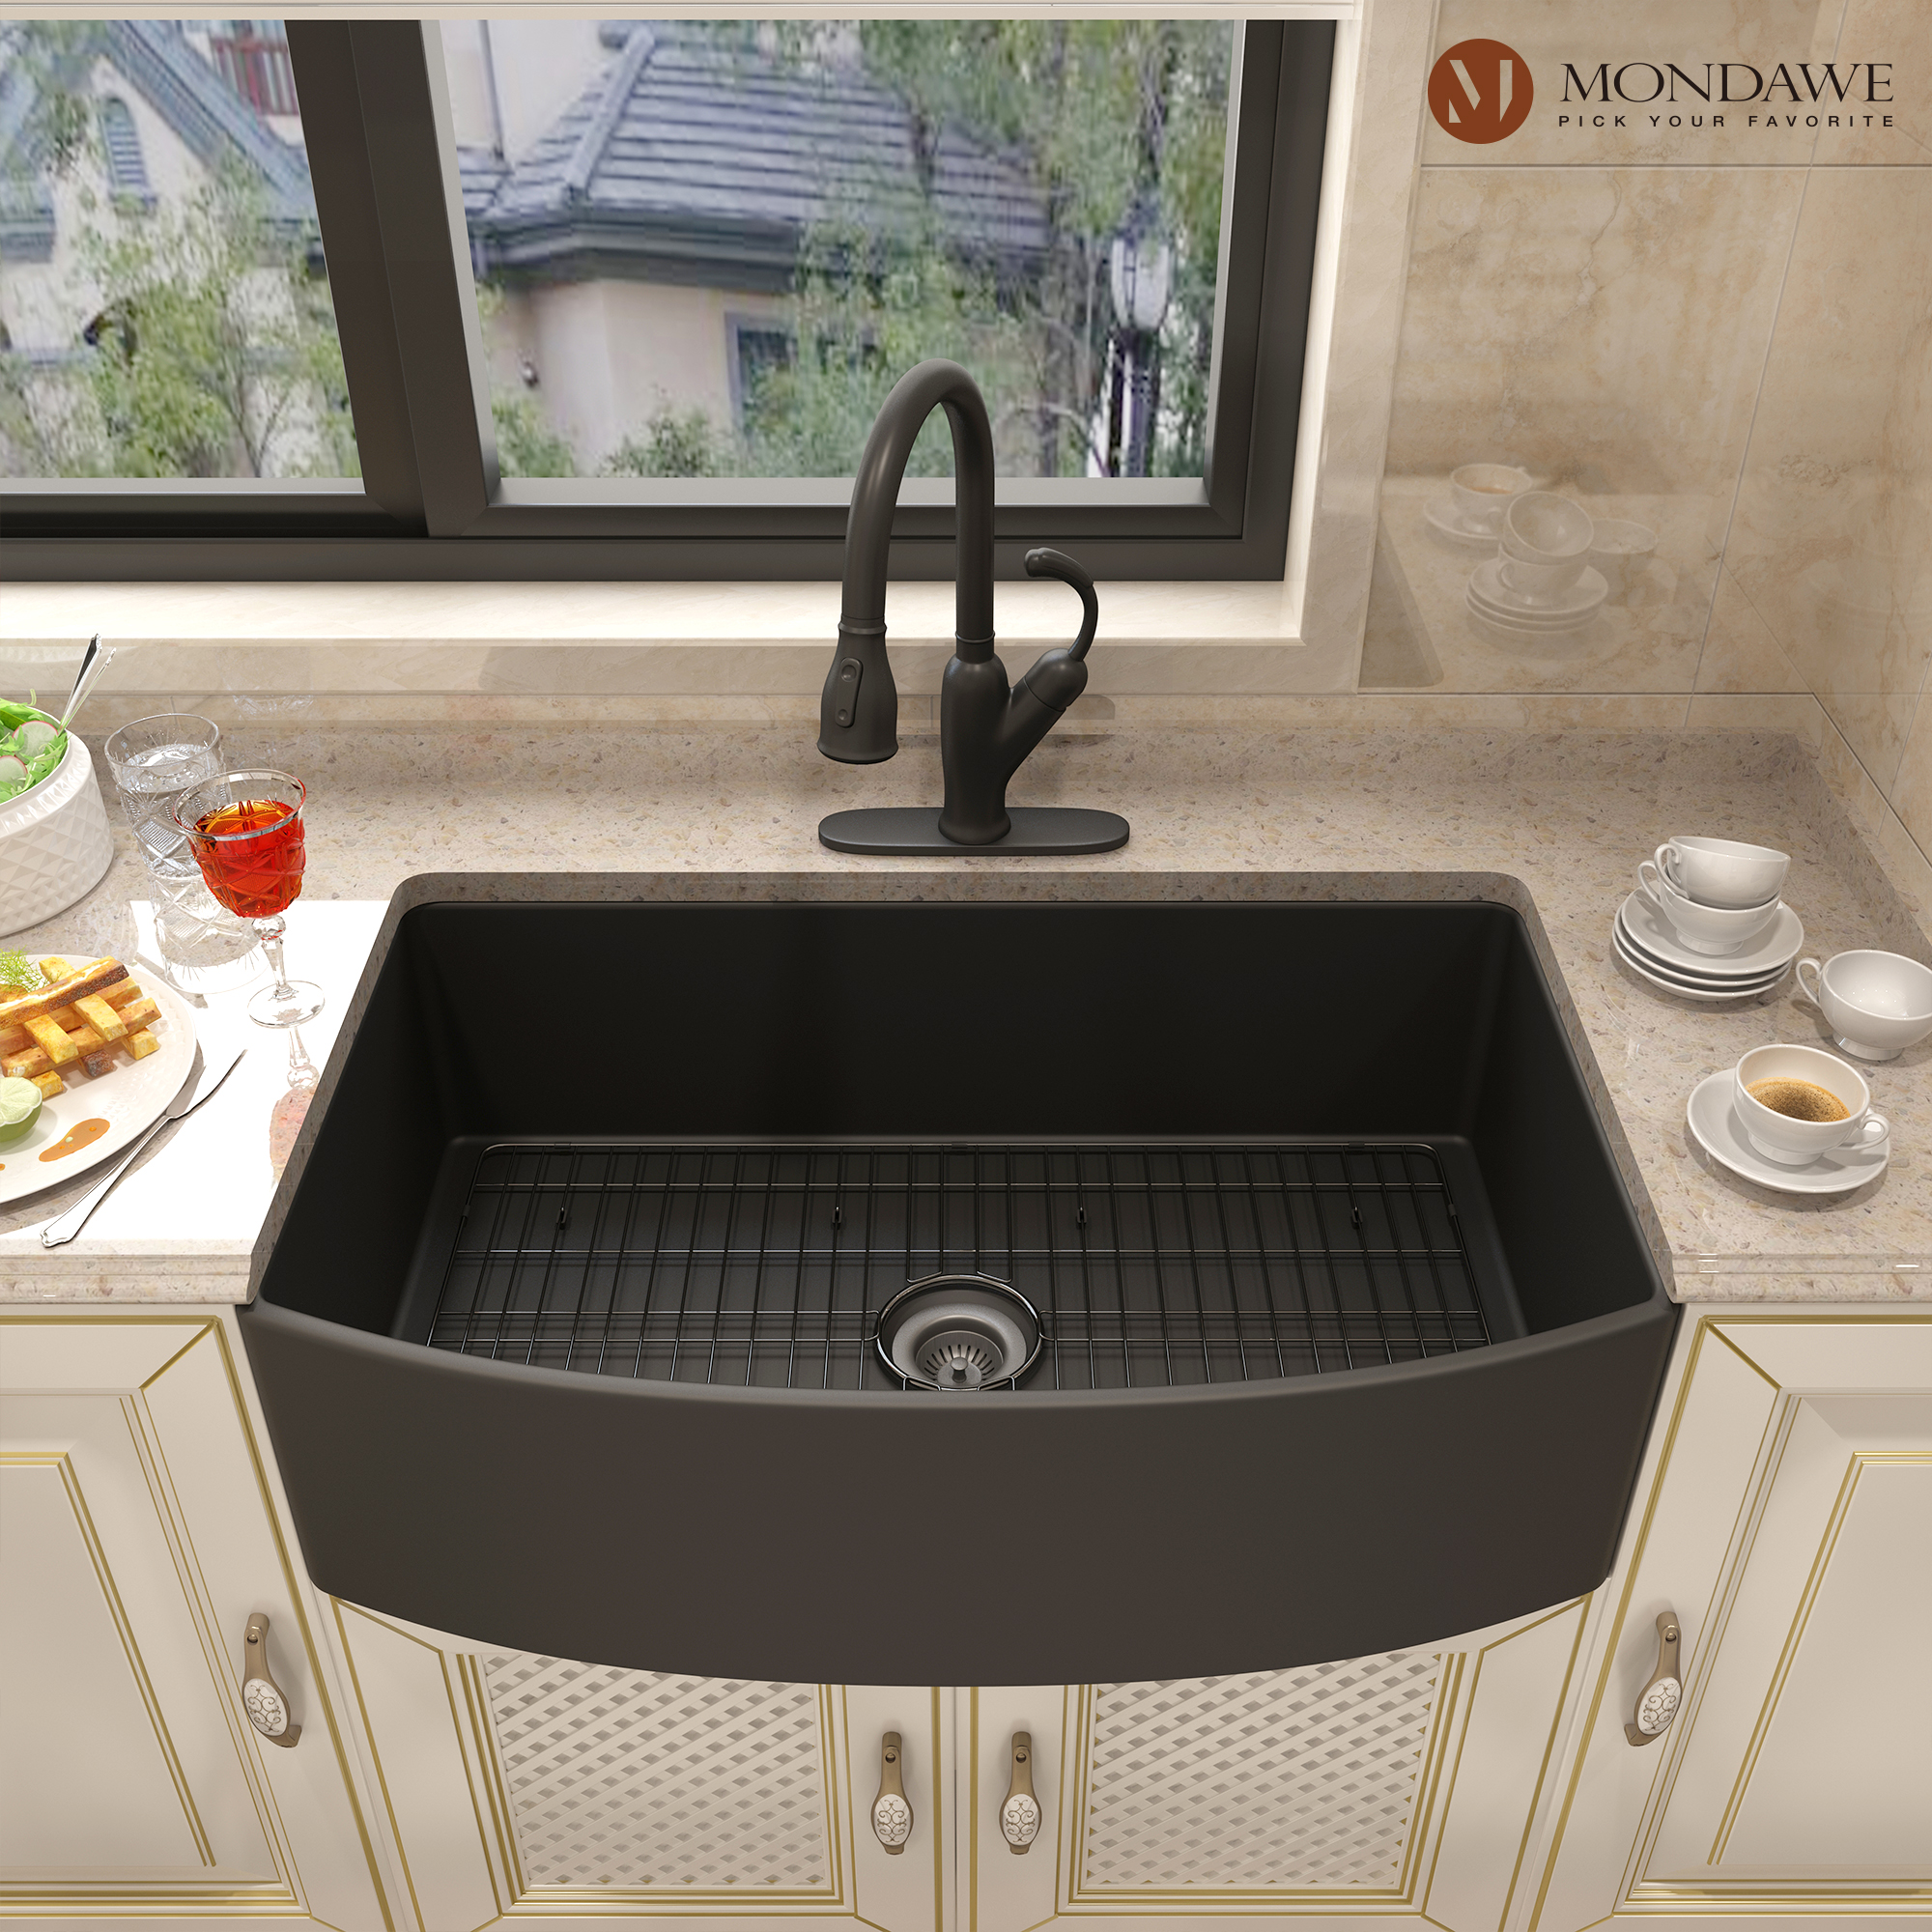 Farmhouse 33 In. Single Bowl Fireclay Kitchen Sink Comes With Pull Down Kitchen Faucet -Mondawe